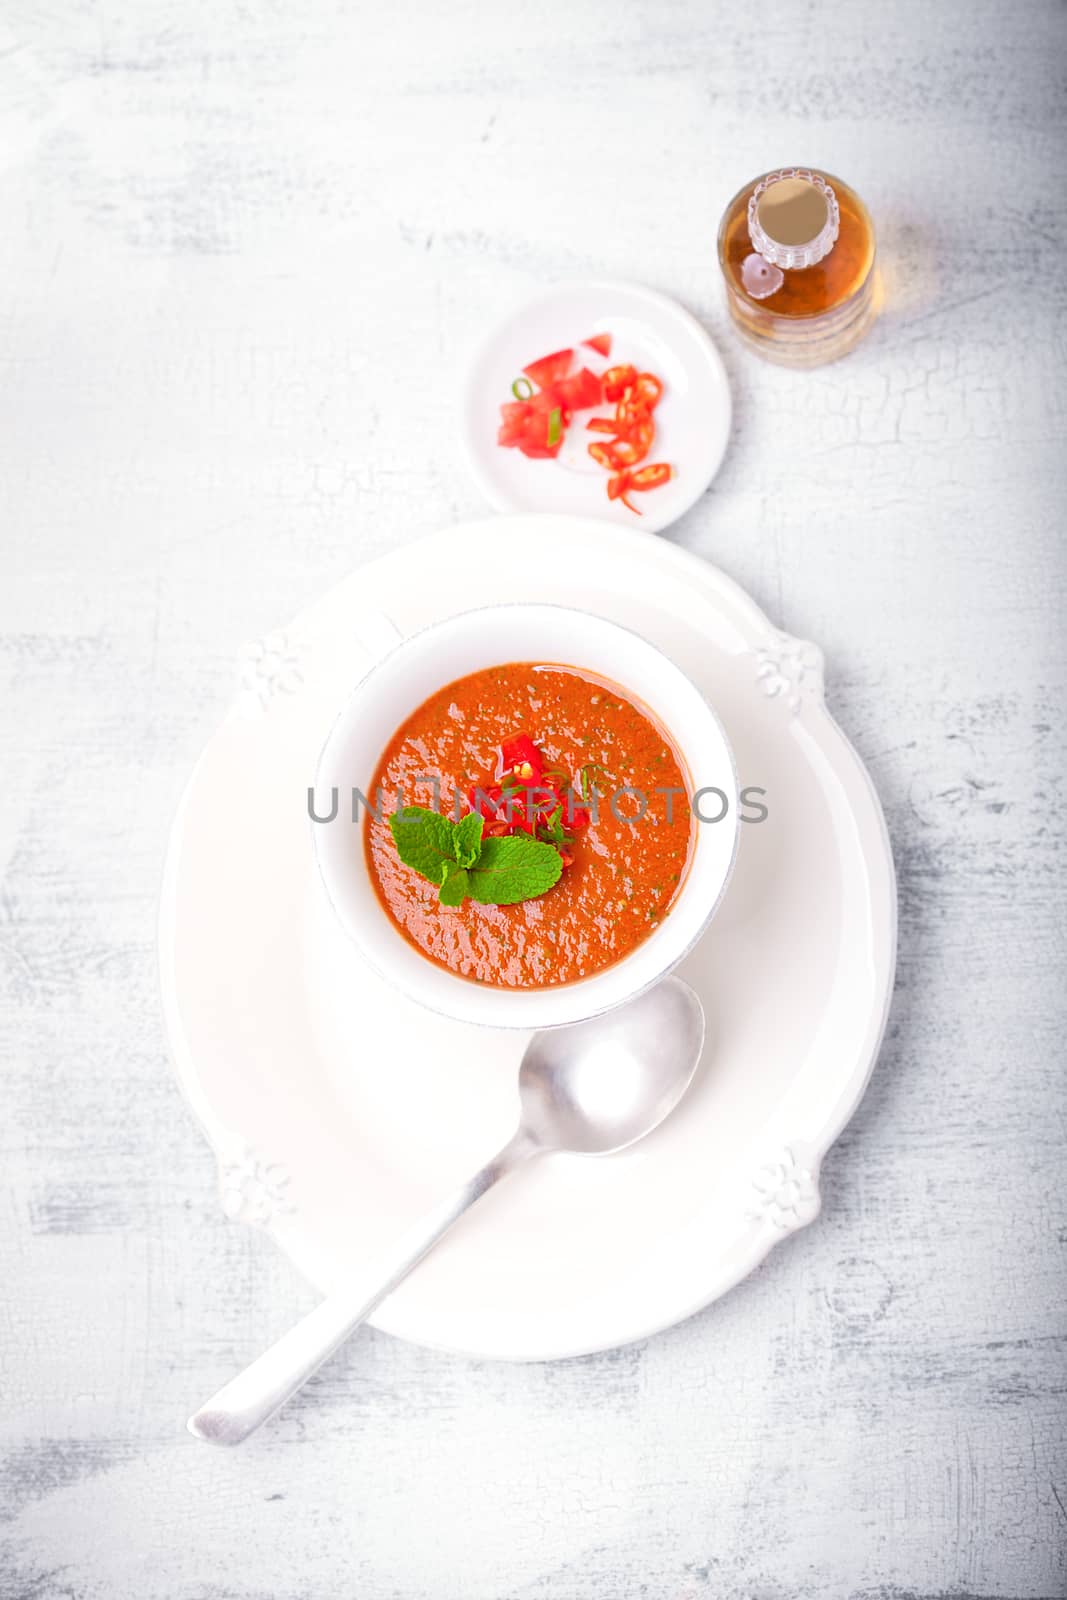 Bowl of Fresh tomato soup Gazpacho served on a table